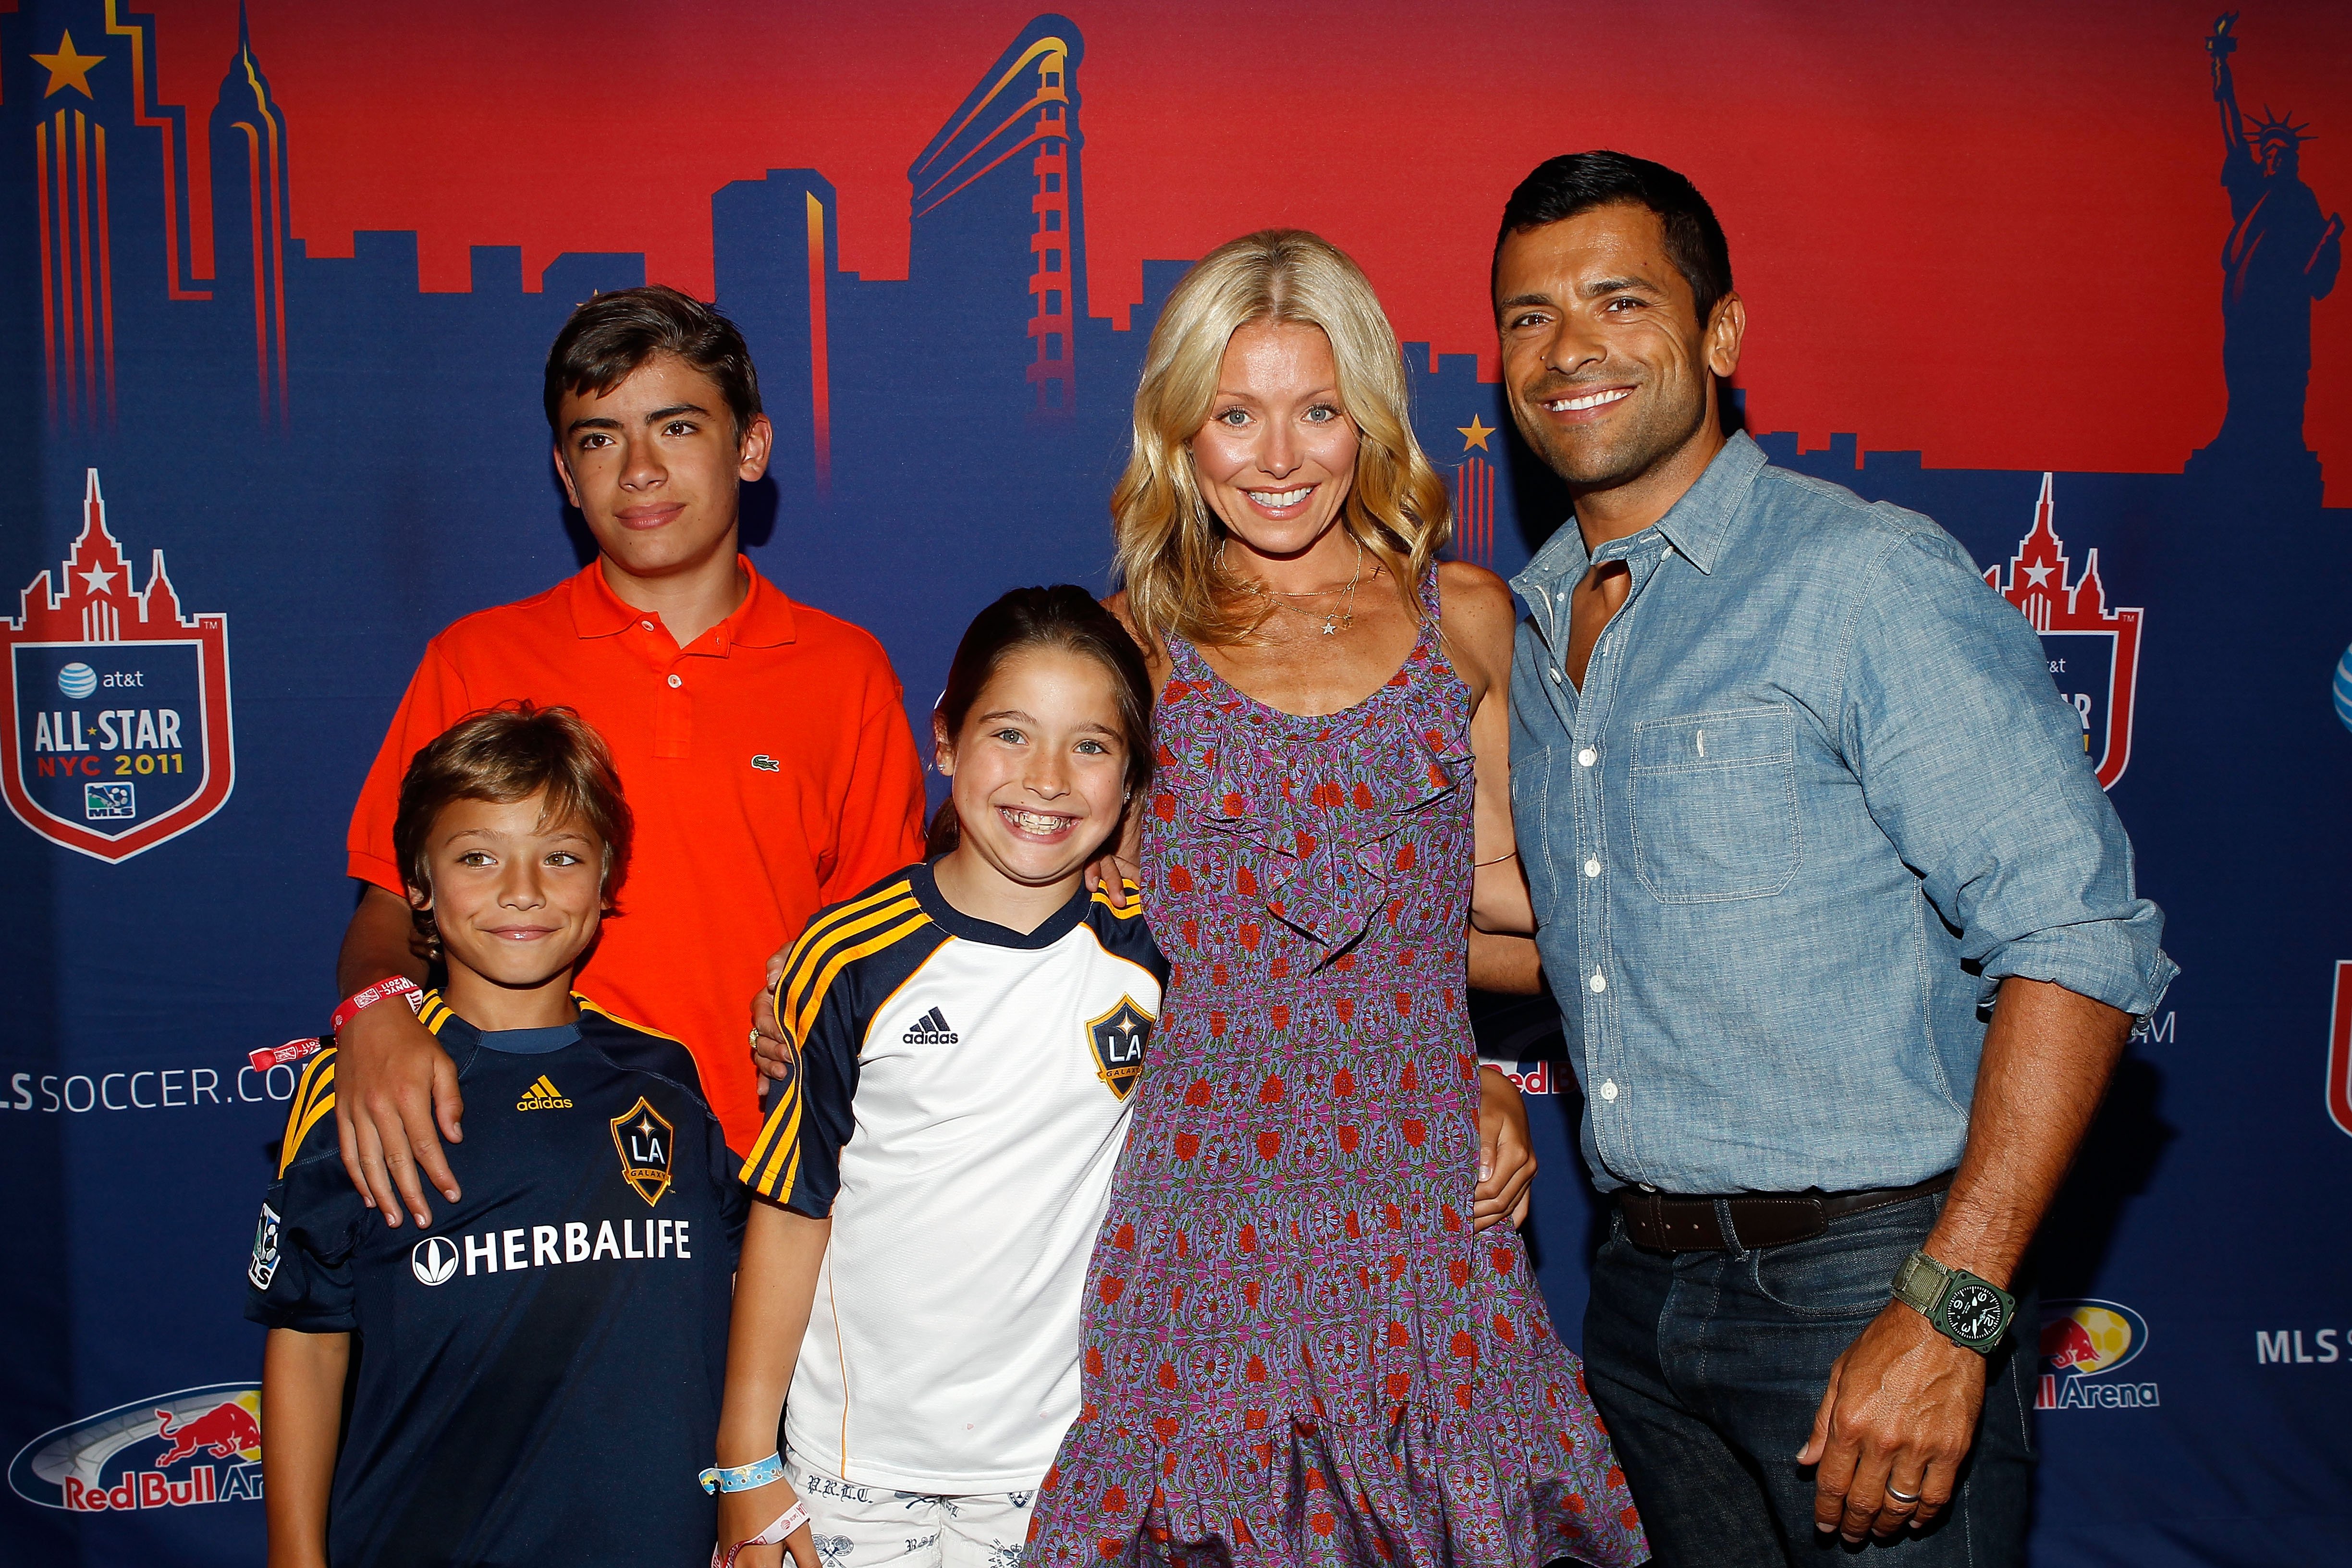 Kelly Ripa, Mark Consuelos, and their kids Michael, Lola, and Joaquin on July 27, 2011 in Harrison, New Jersey | Source: Getty Images